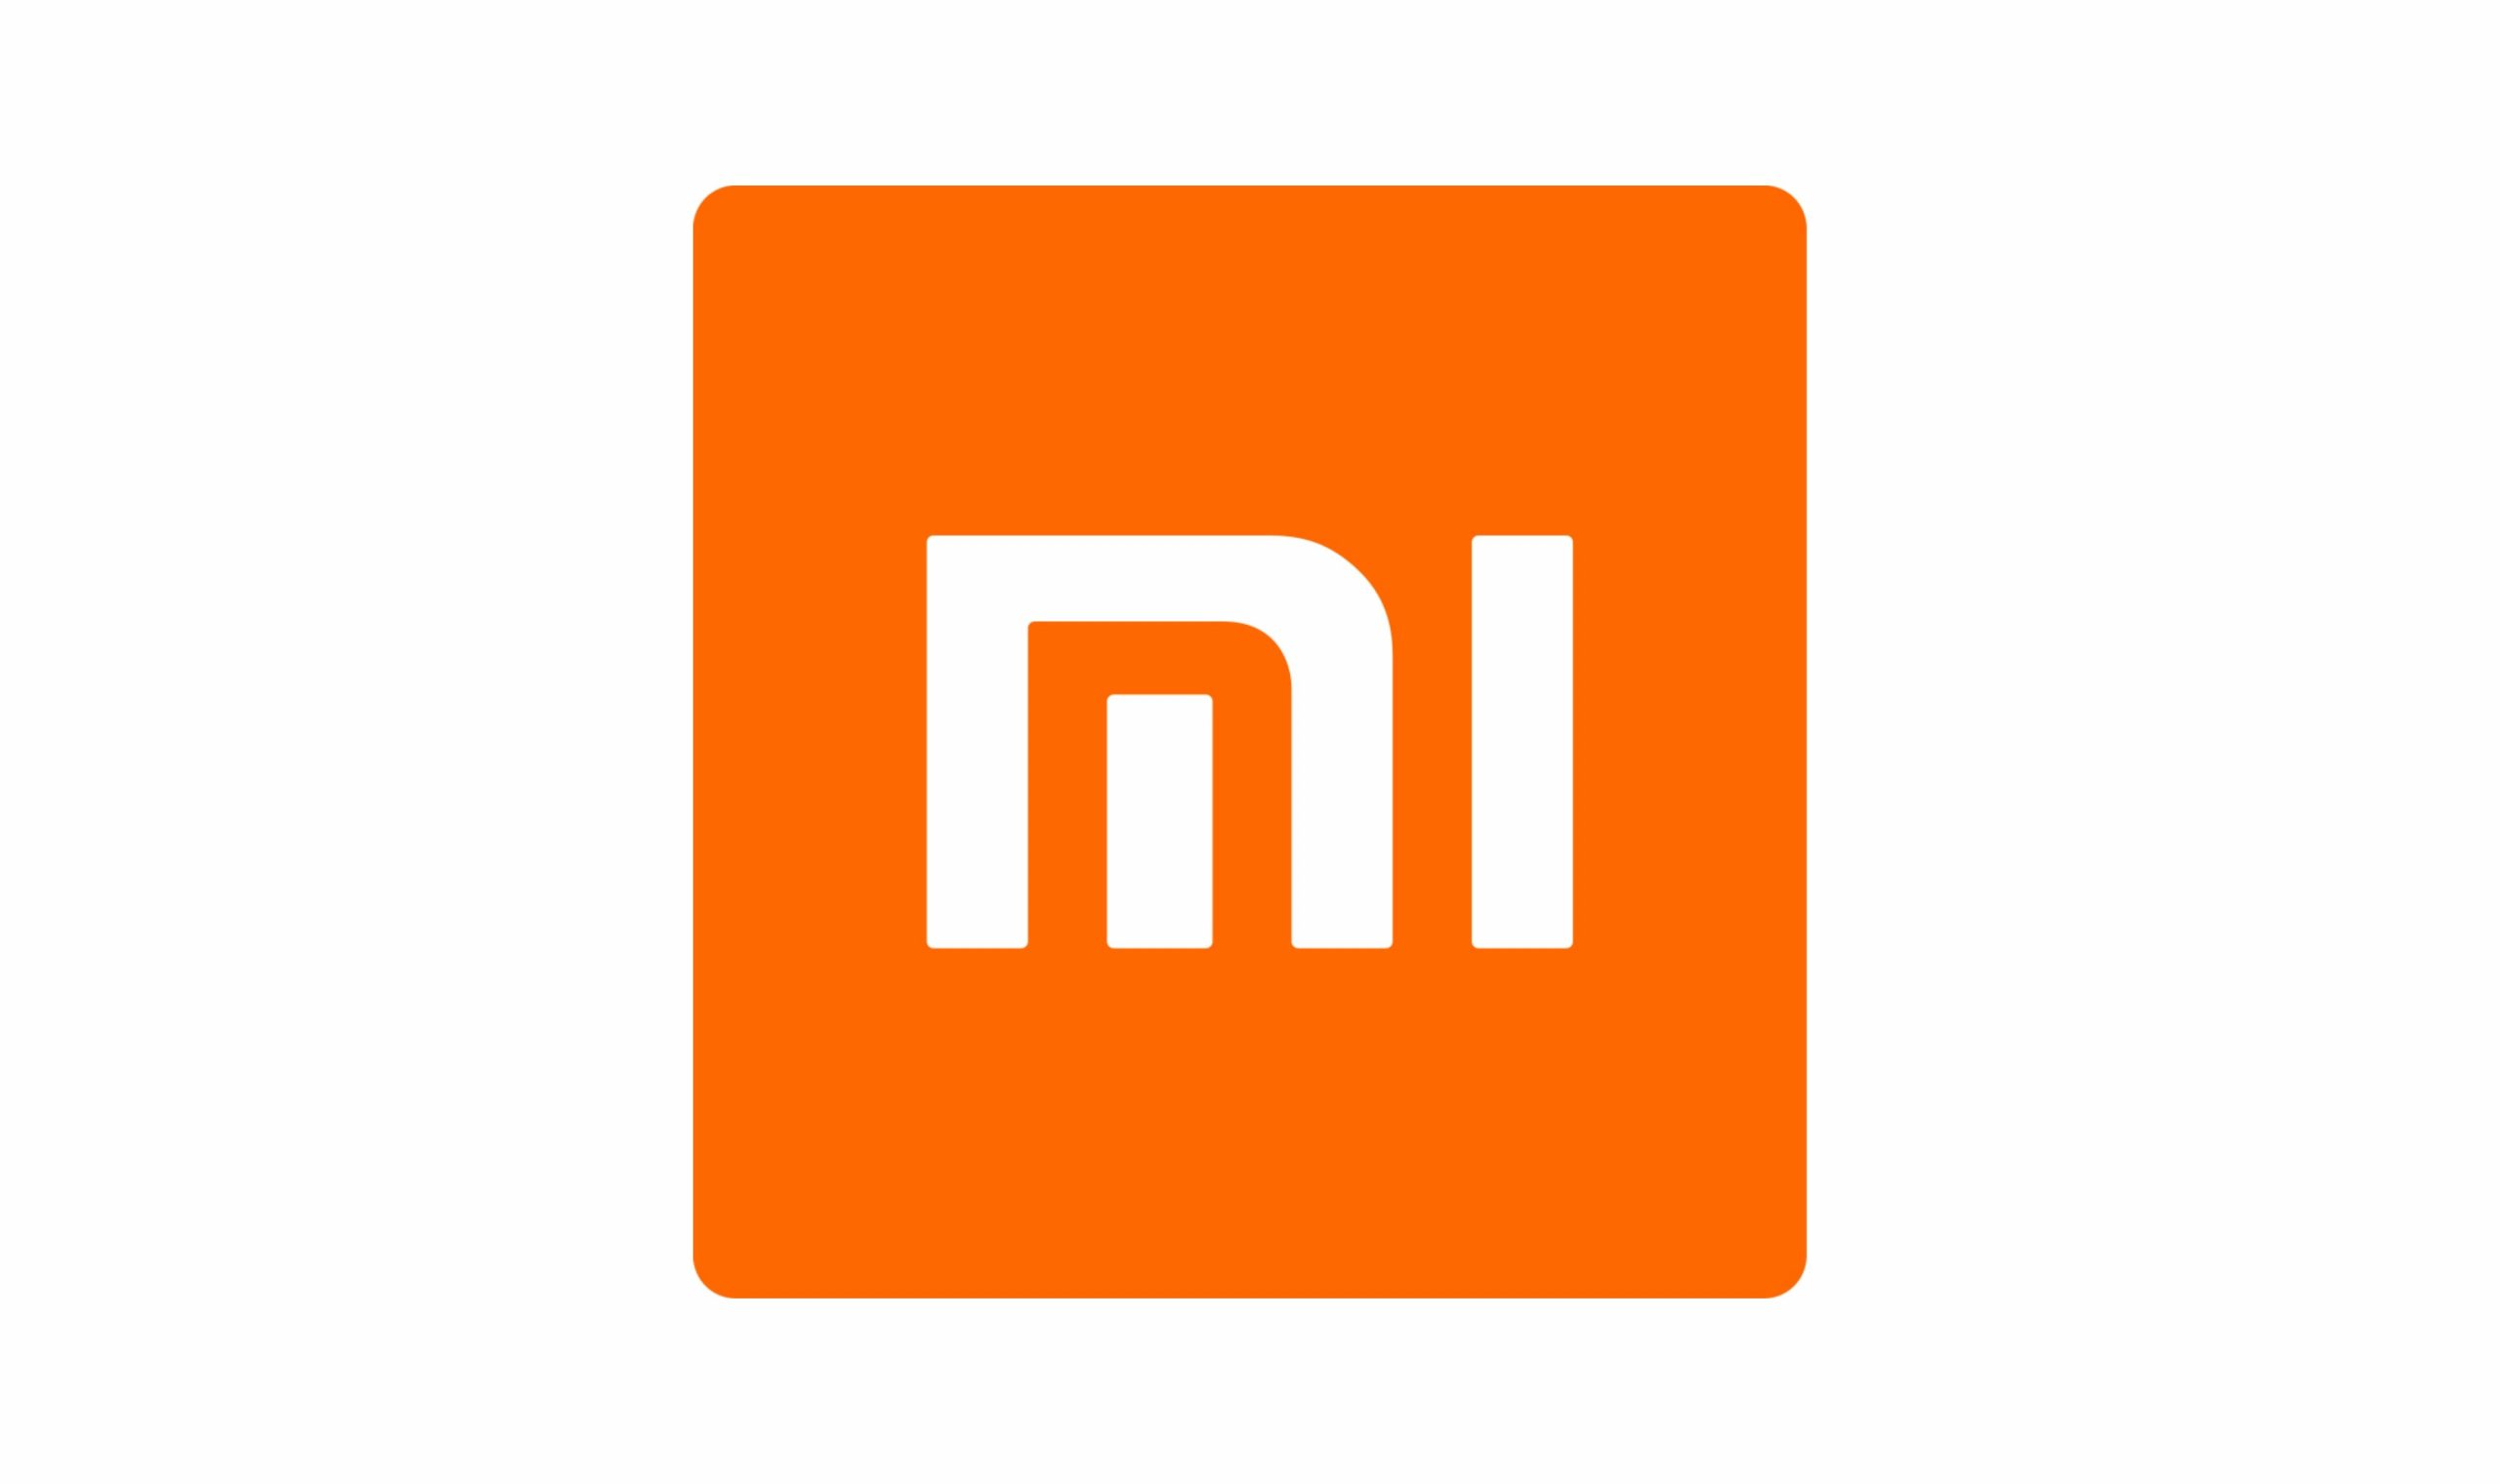 Xiaomi’s average selling price increased to an all-time high of 1,116.3 yuan ($162) in Q2 2020